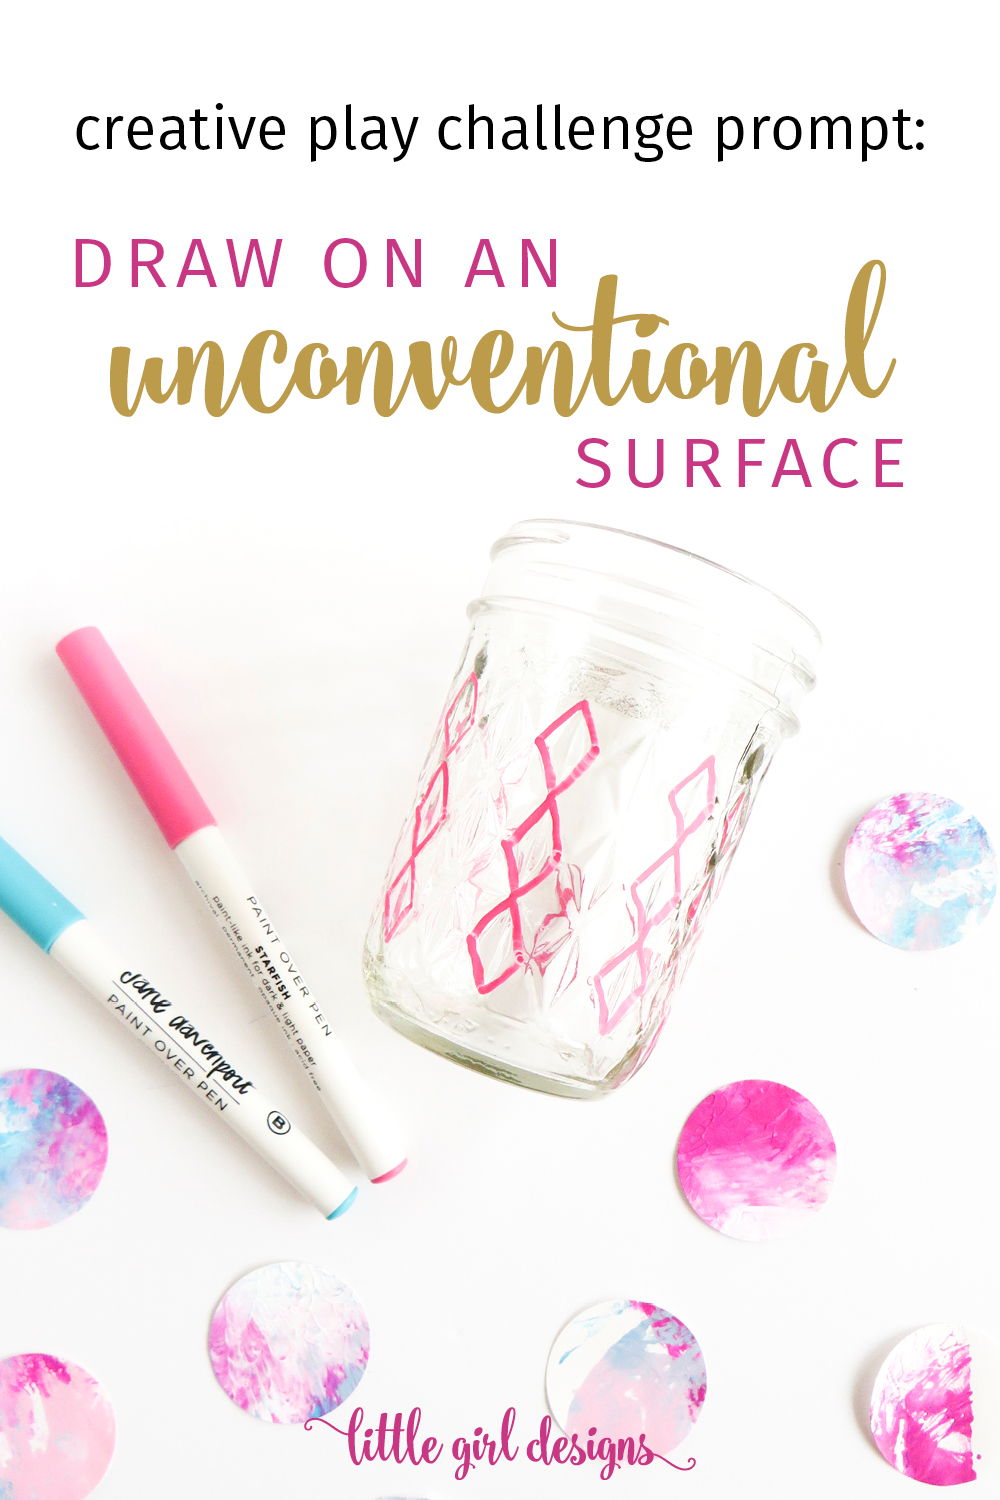 Draw On An Unconventional Surface